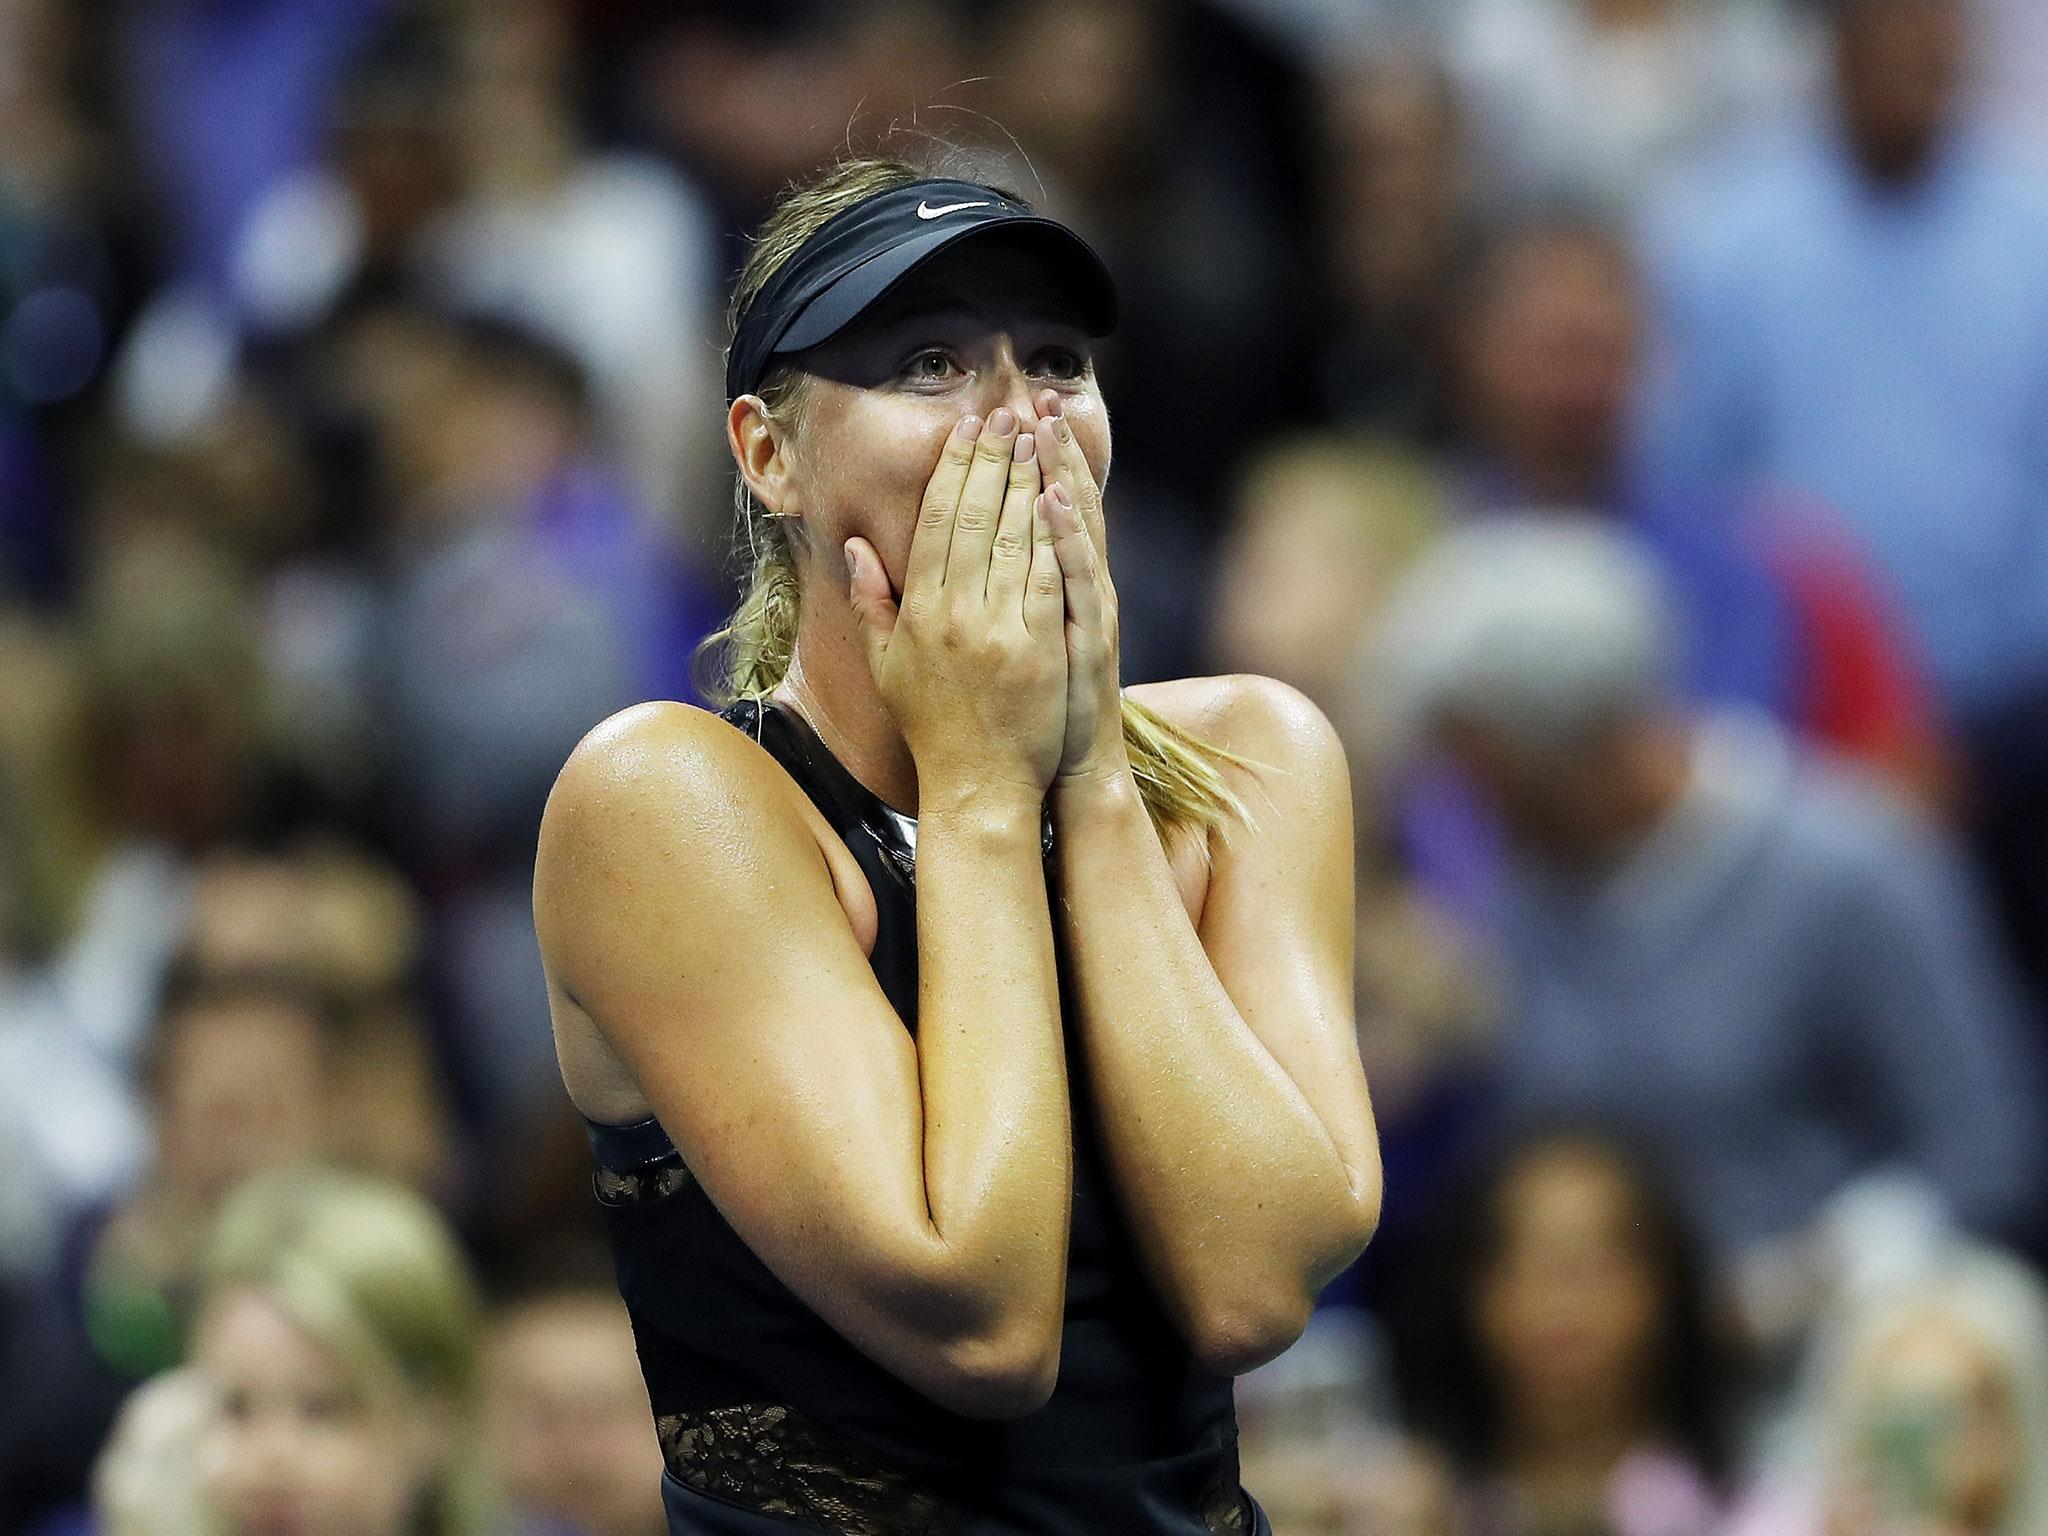 Maria Sharapova was playing her first Grand Slam match in 19 months